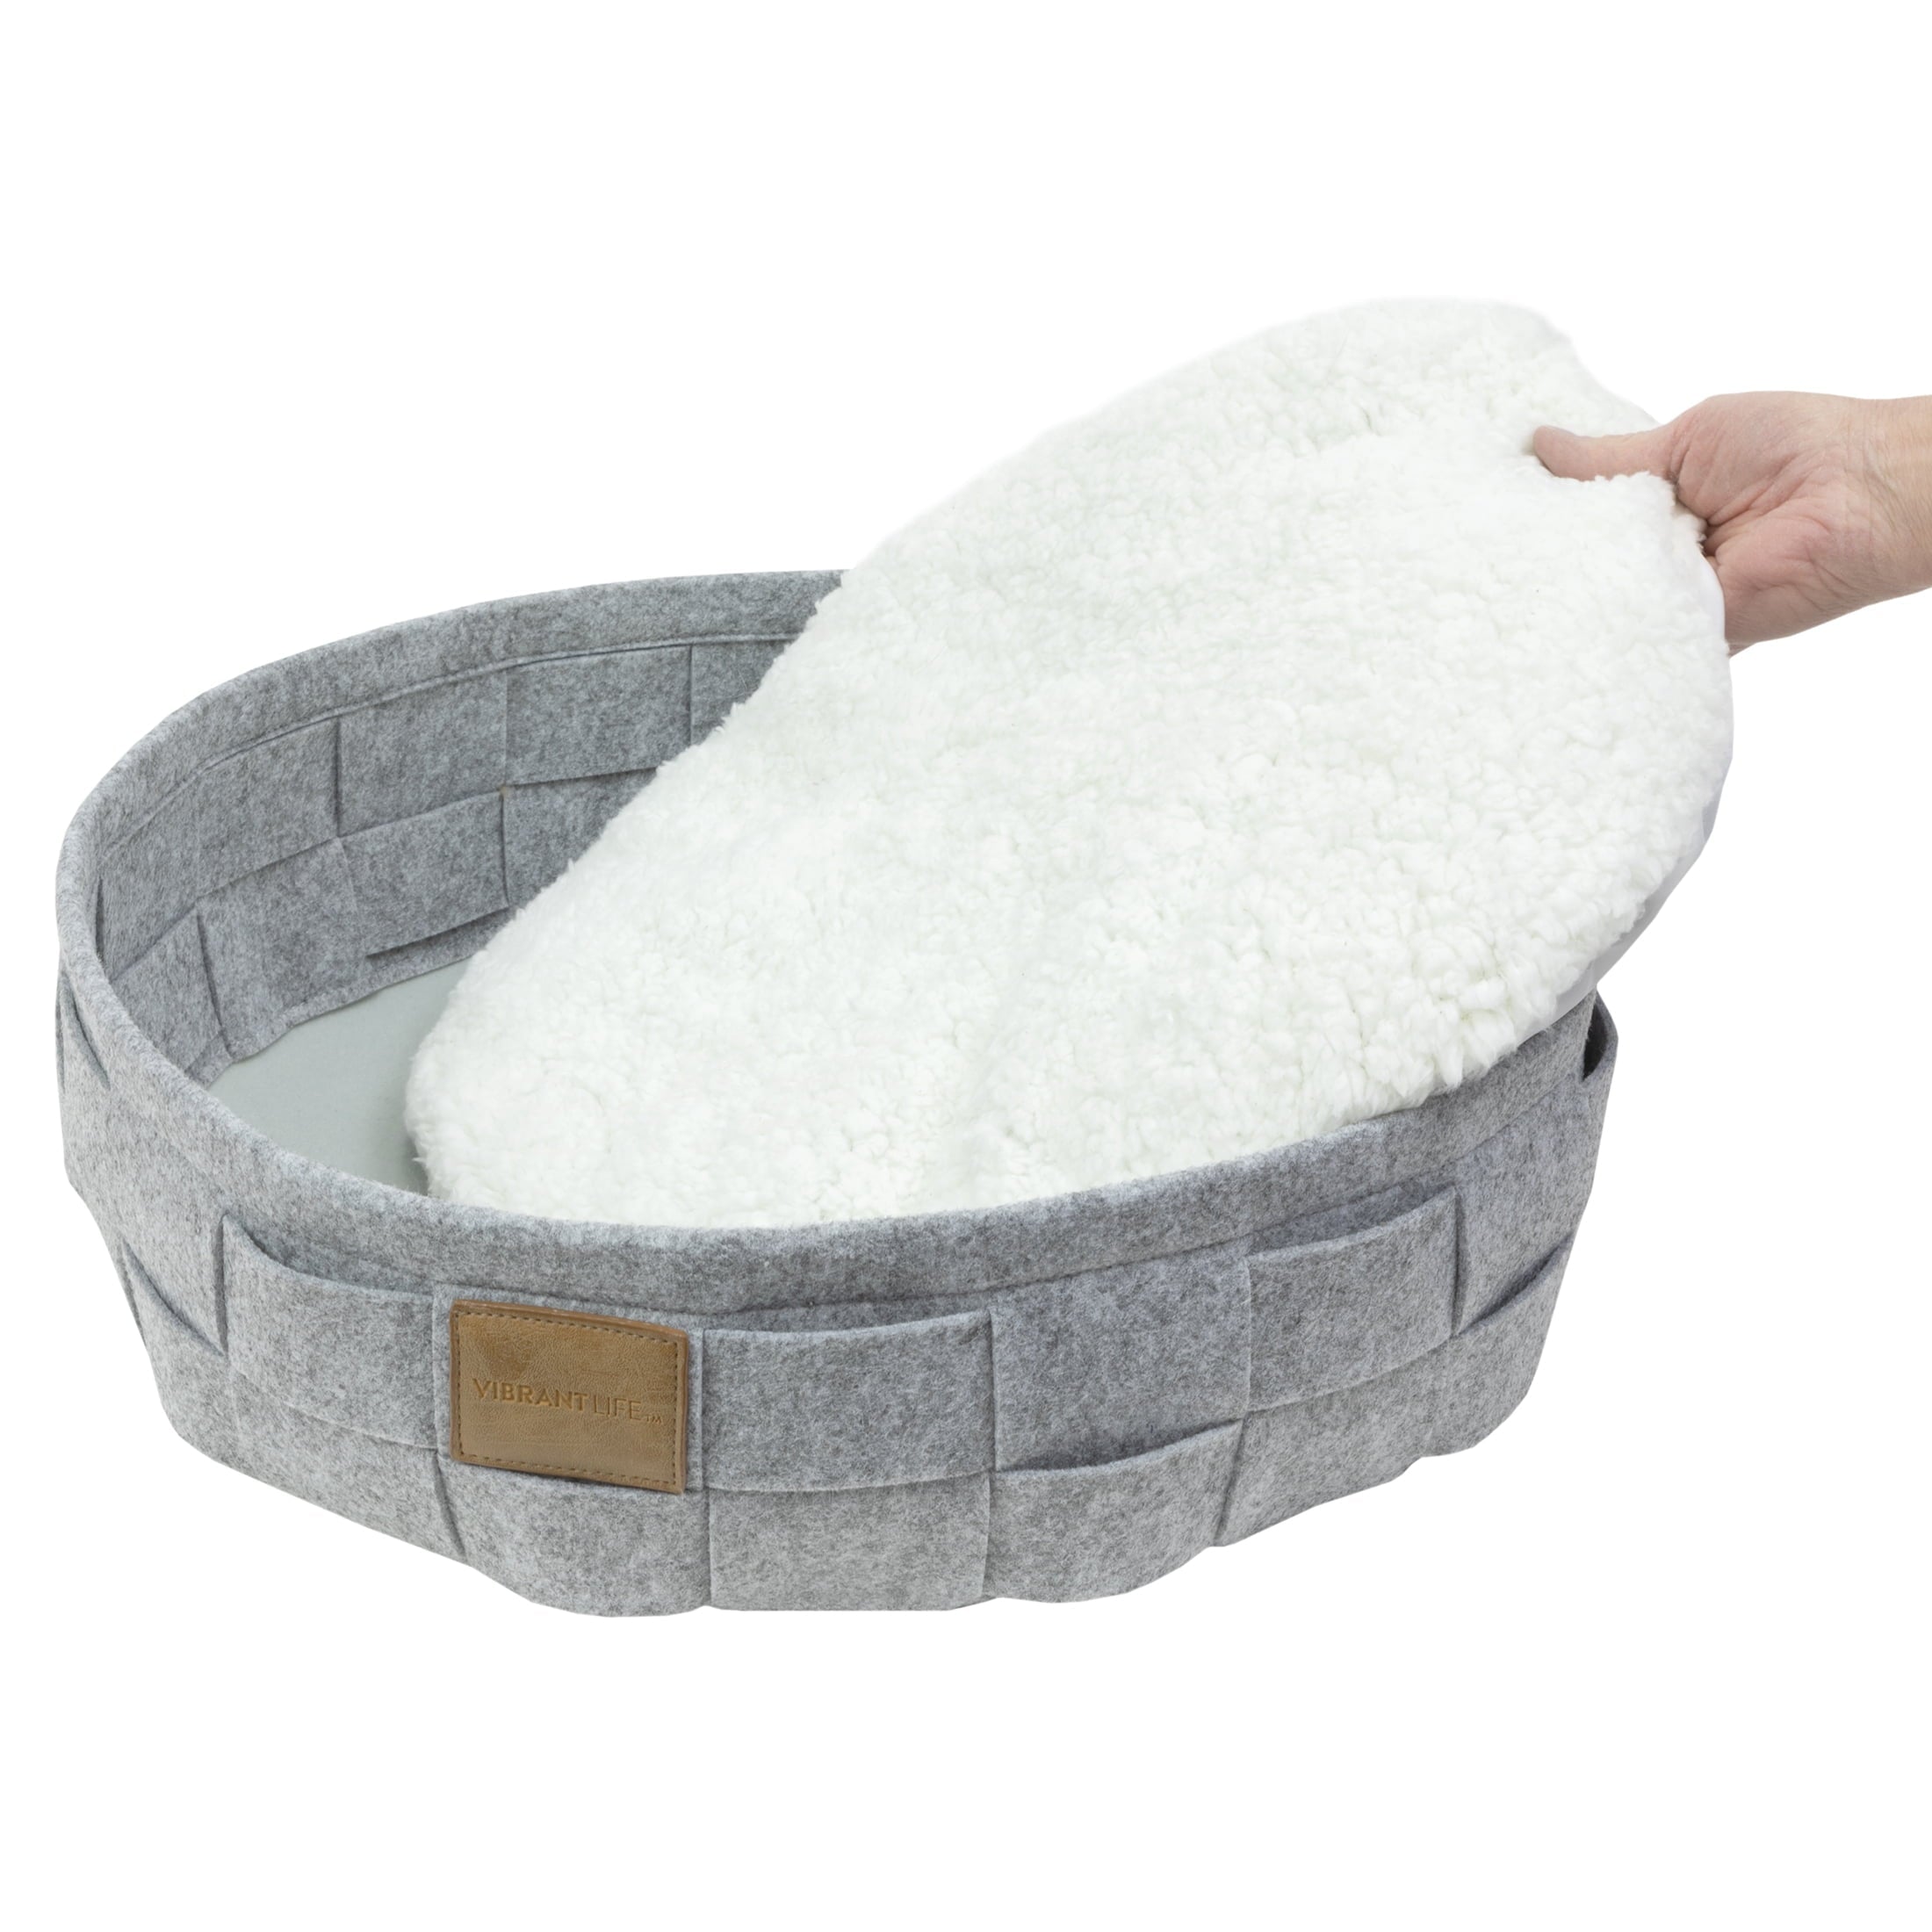 Wholesale prices with free shipping all over United States Vibrant Life Round Woven Felt Cat Bed, Washable Cushion, Cat Basket, Small Animal Bed - Steven Deals